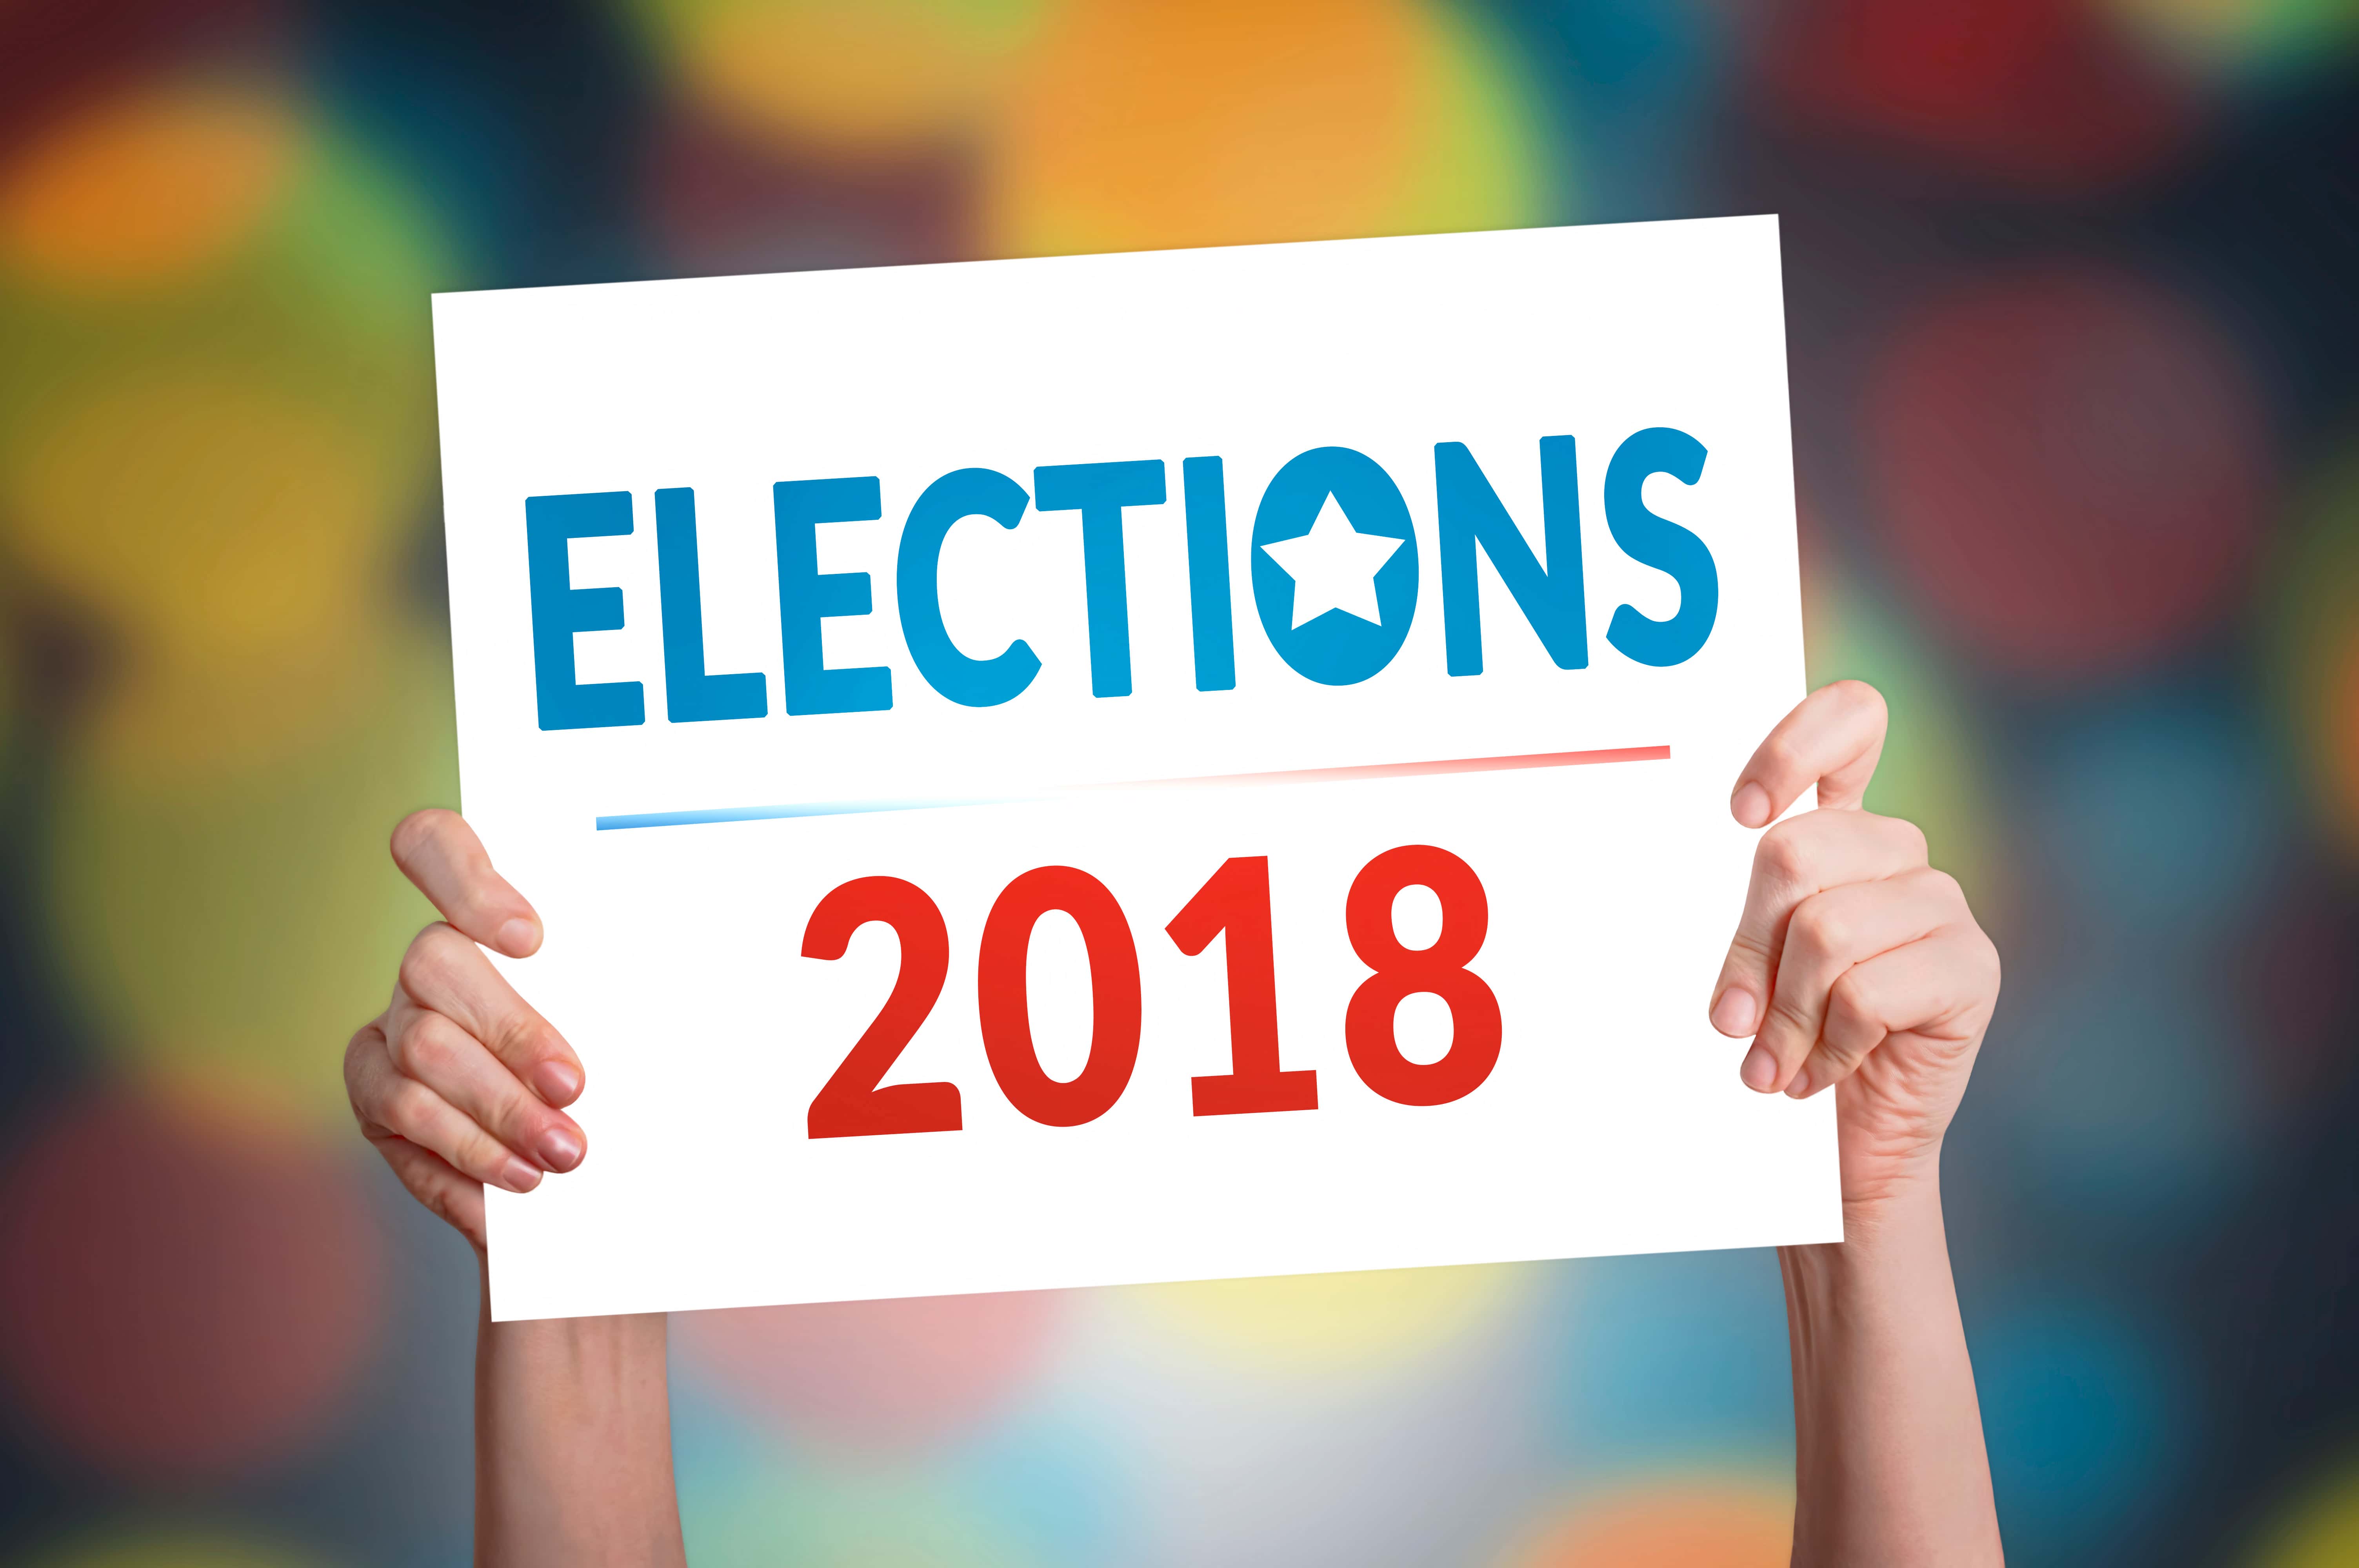 elections-2018-stock-sign